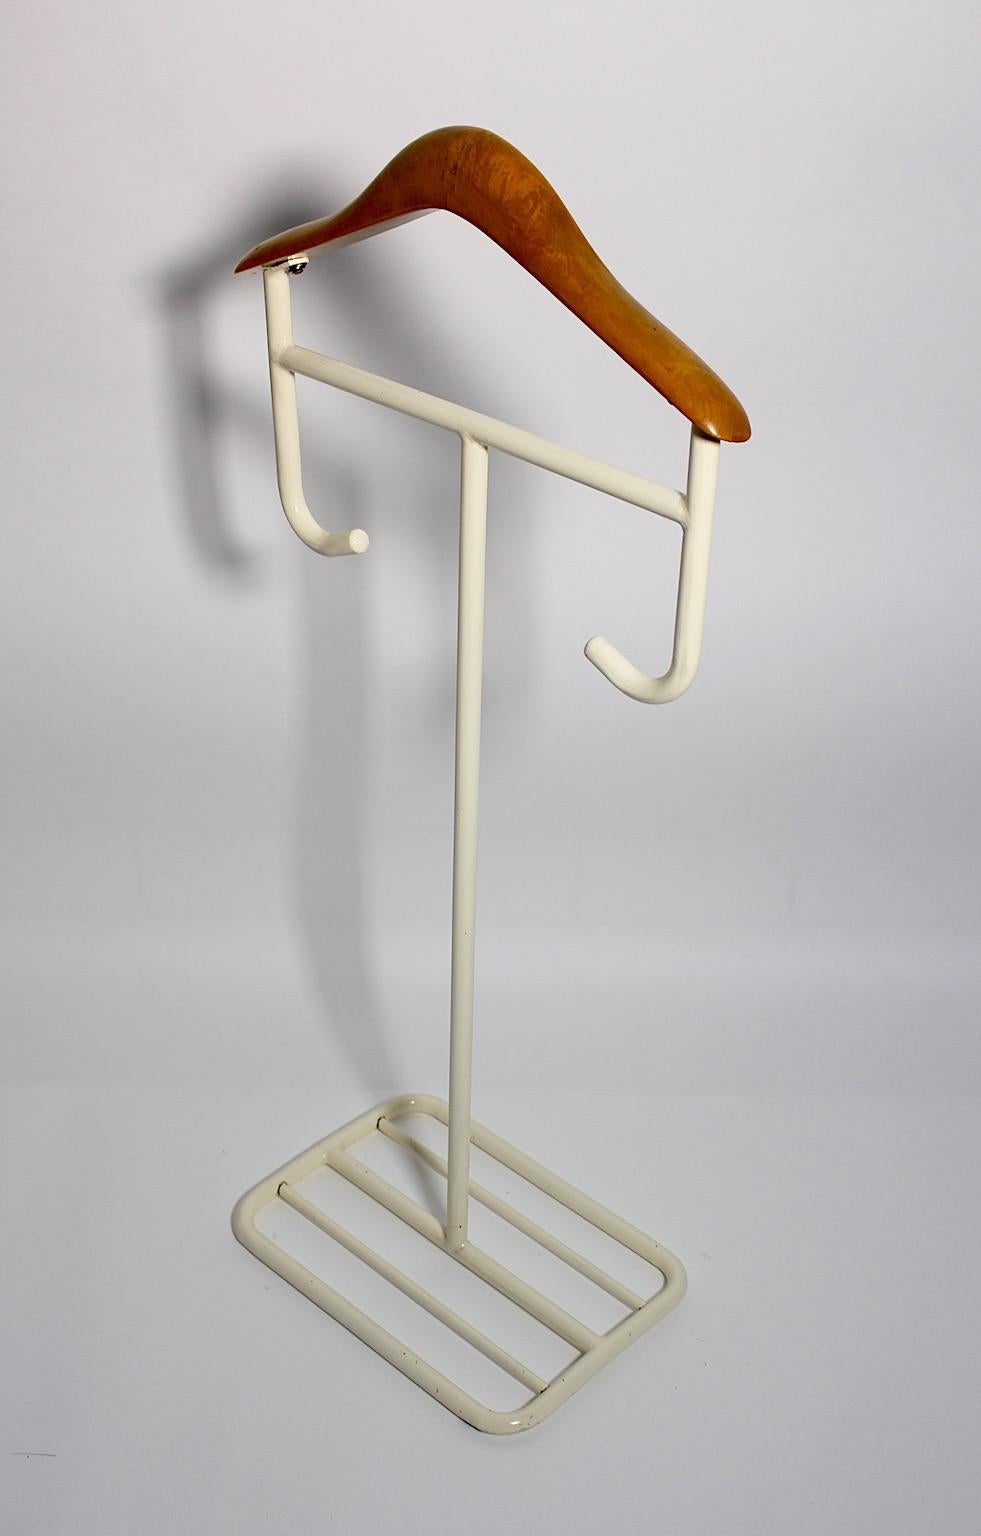 White Metal Beech Bauhaus Valet Coat Rack circa 1930 Germany In Good Condition For Sale In Vienna, AT